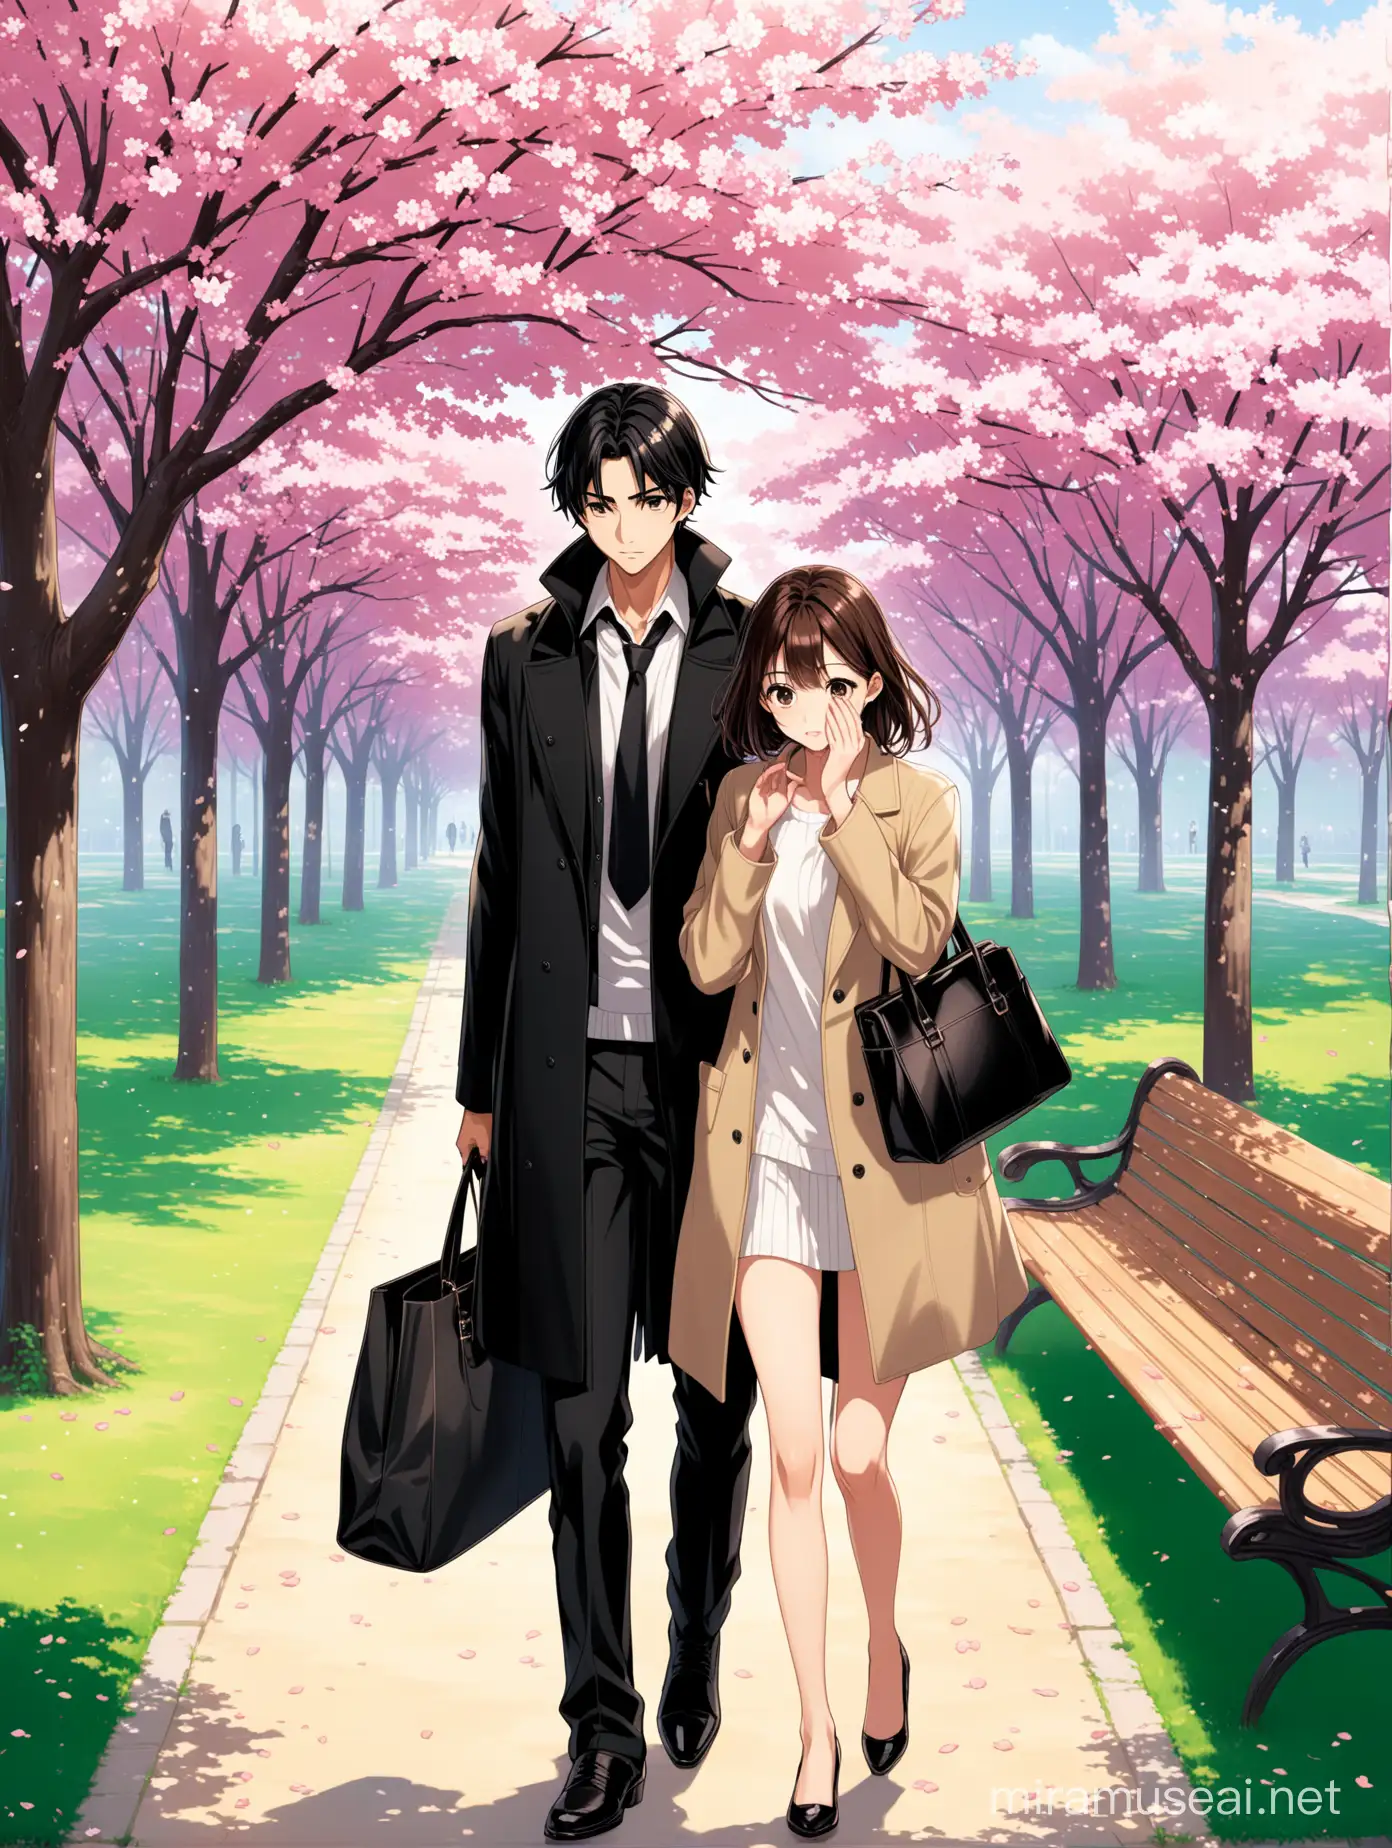 Anime of: A beautiful girl with short brown hair and big brown eyes, wearing a long-necked black sweater with a sand-colored coat over it, black pants and black heel shoes. She is trying to wipe away her tears with her right hand, while in her left hand she carries a black women’s bag. Behind her appears a handsome young man with black hair and big black eyes, wearing a white shirt and tie.  A black neck, a long black coat, long black pants, and shoes, and it appears that they separated at that moment after a love story, and all of these were events that took place in a park in Tokyo, and a wooden garden chair and sakura trees whose leaves were falling on them appeared next to them. They are alone in the garden